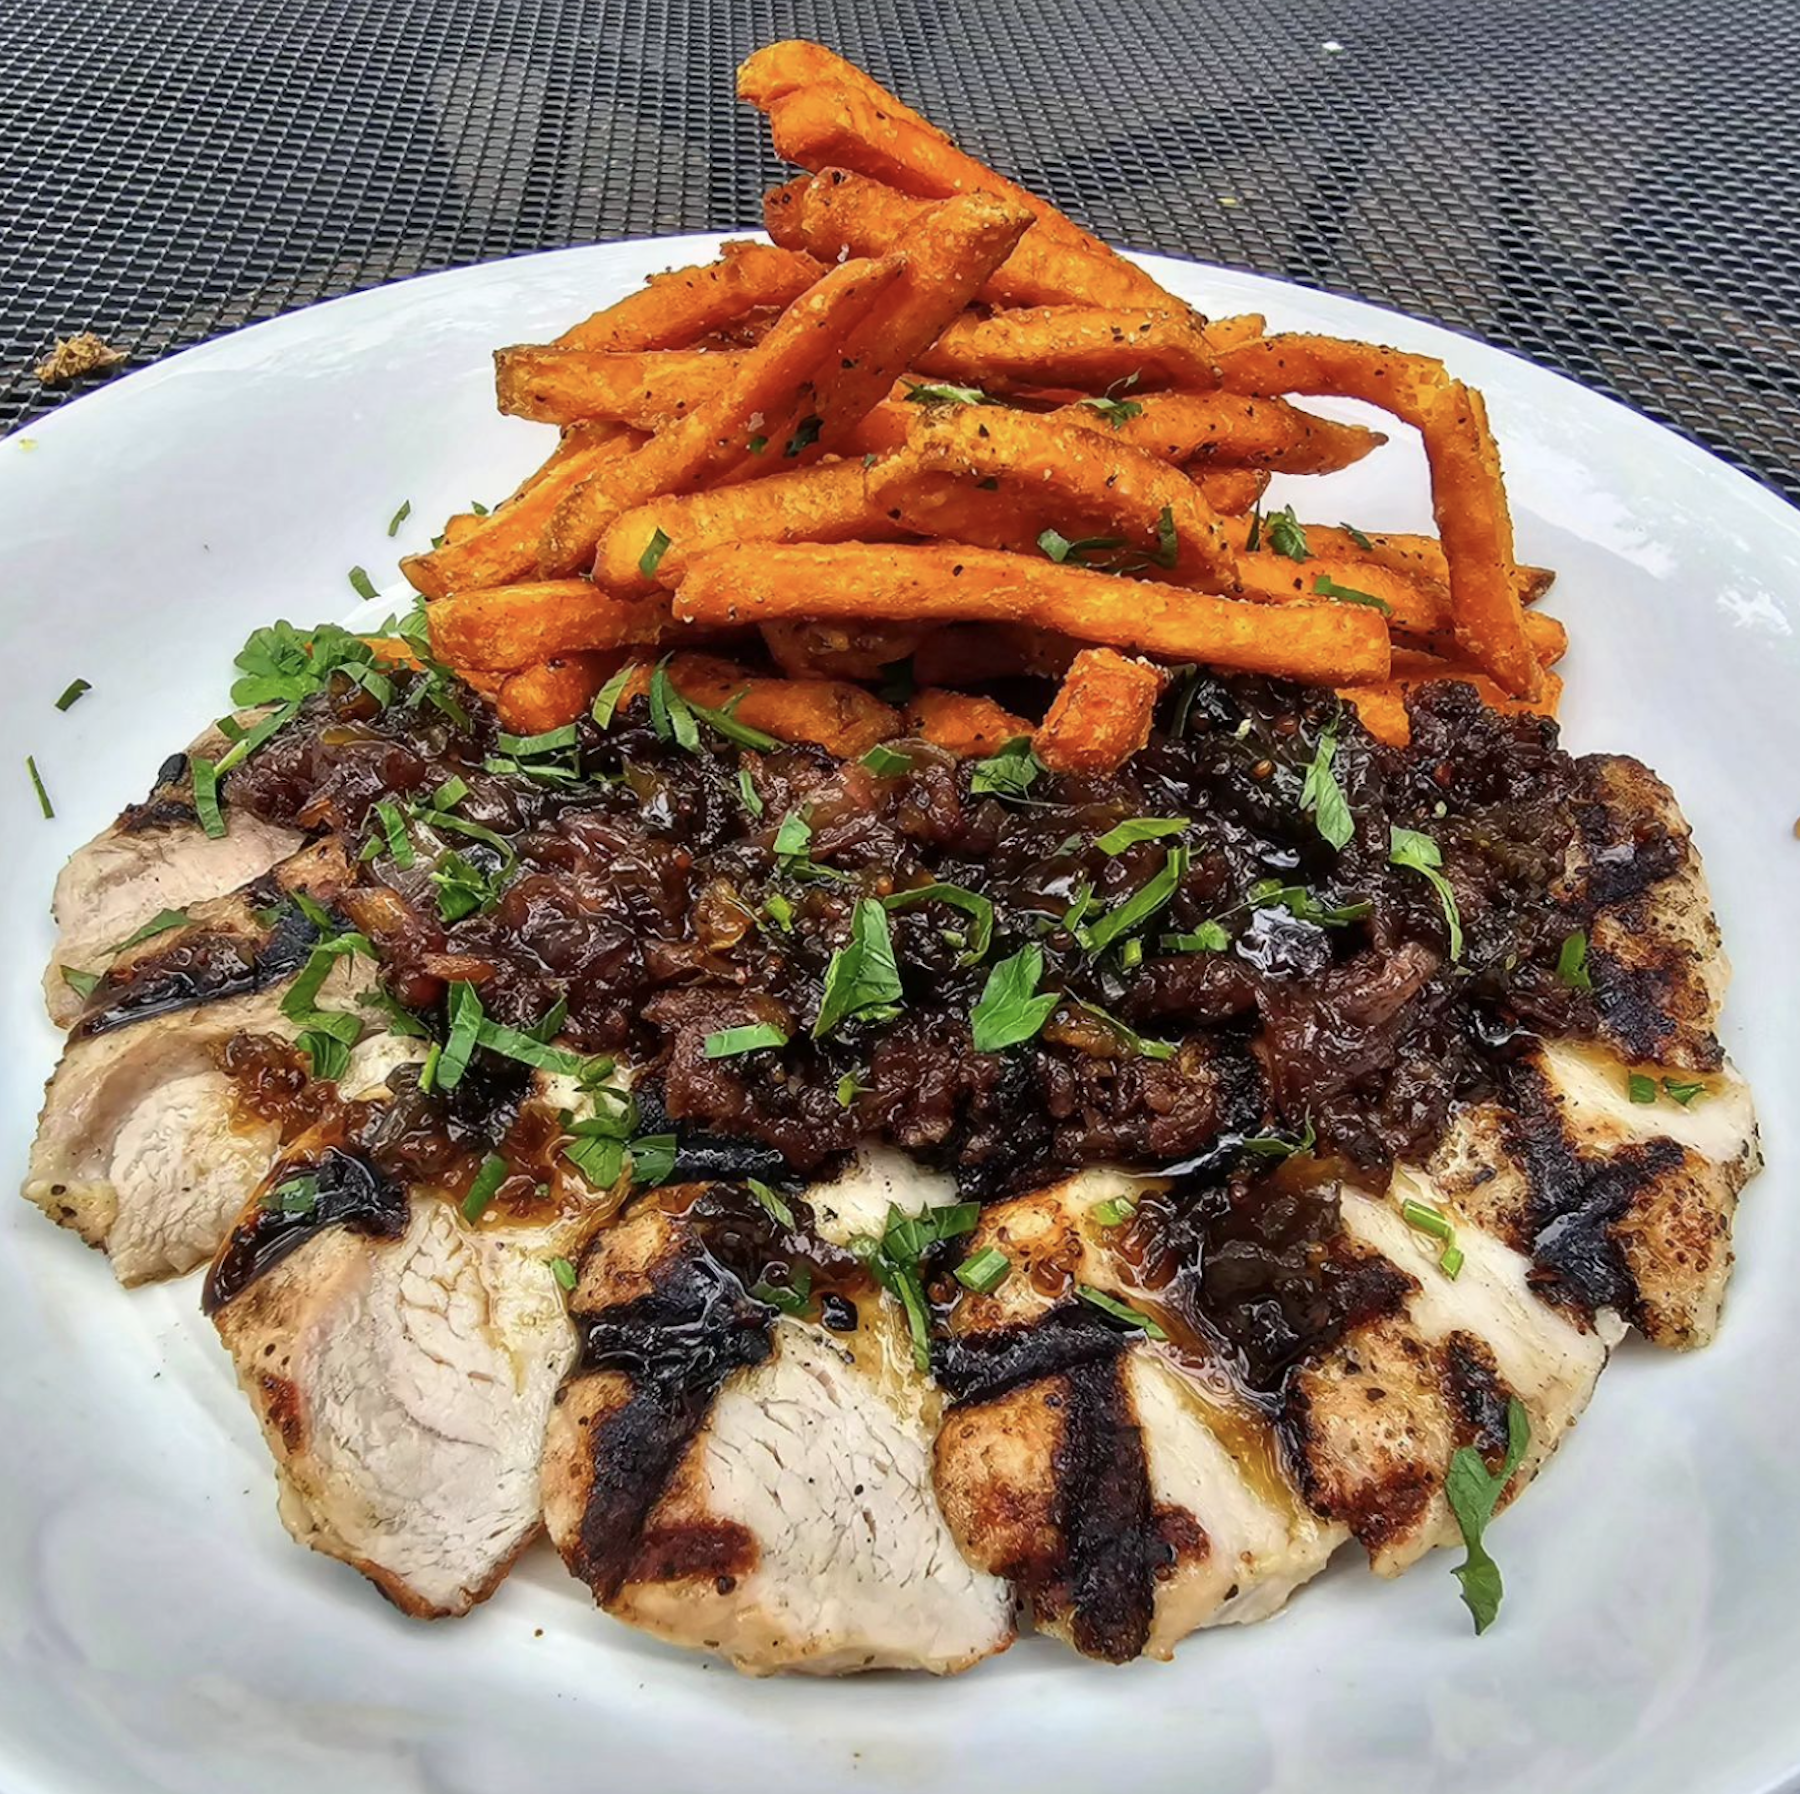 A dish of sliced pork, topped with a caramelized garnish and roasted sweet potato fries.  